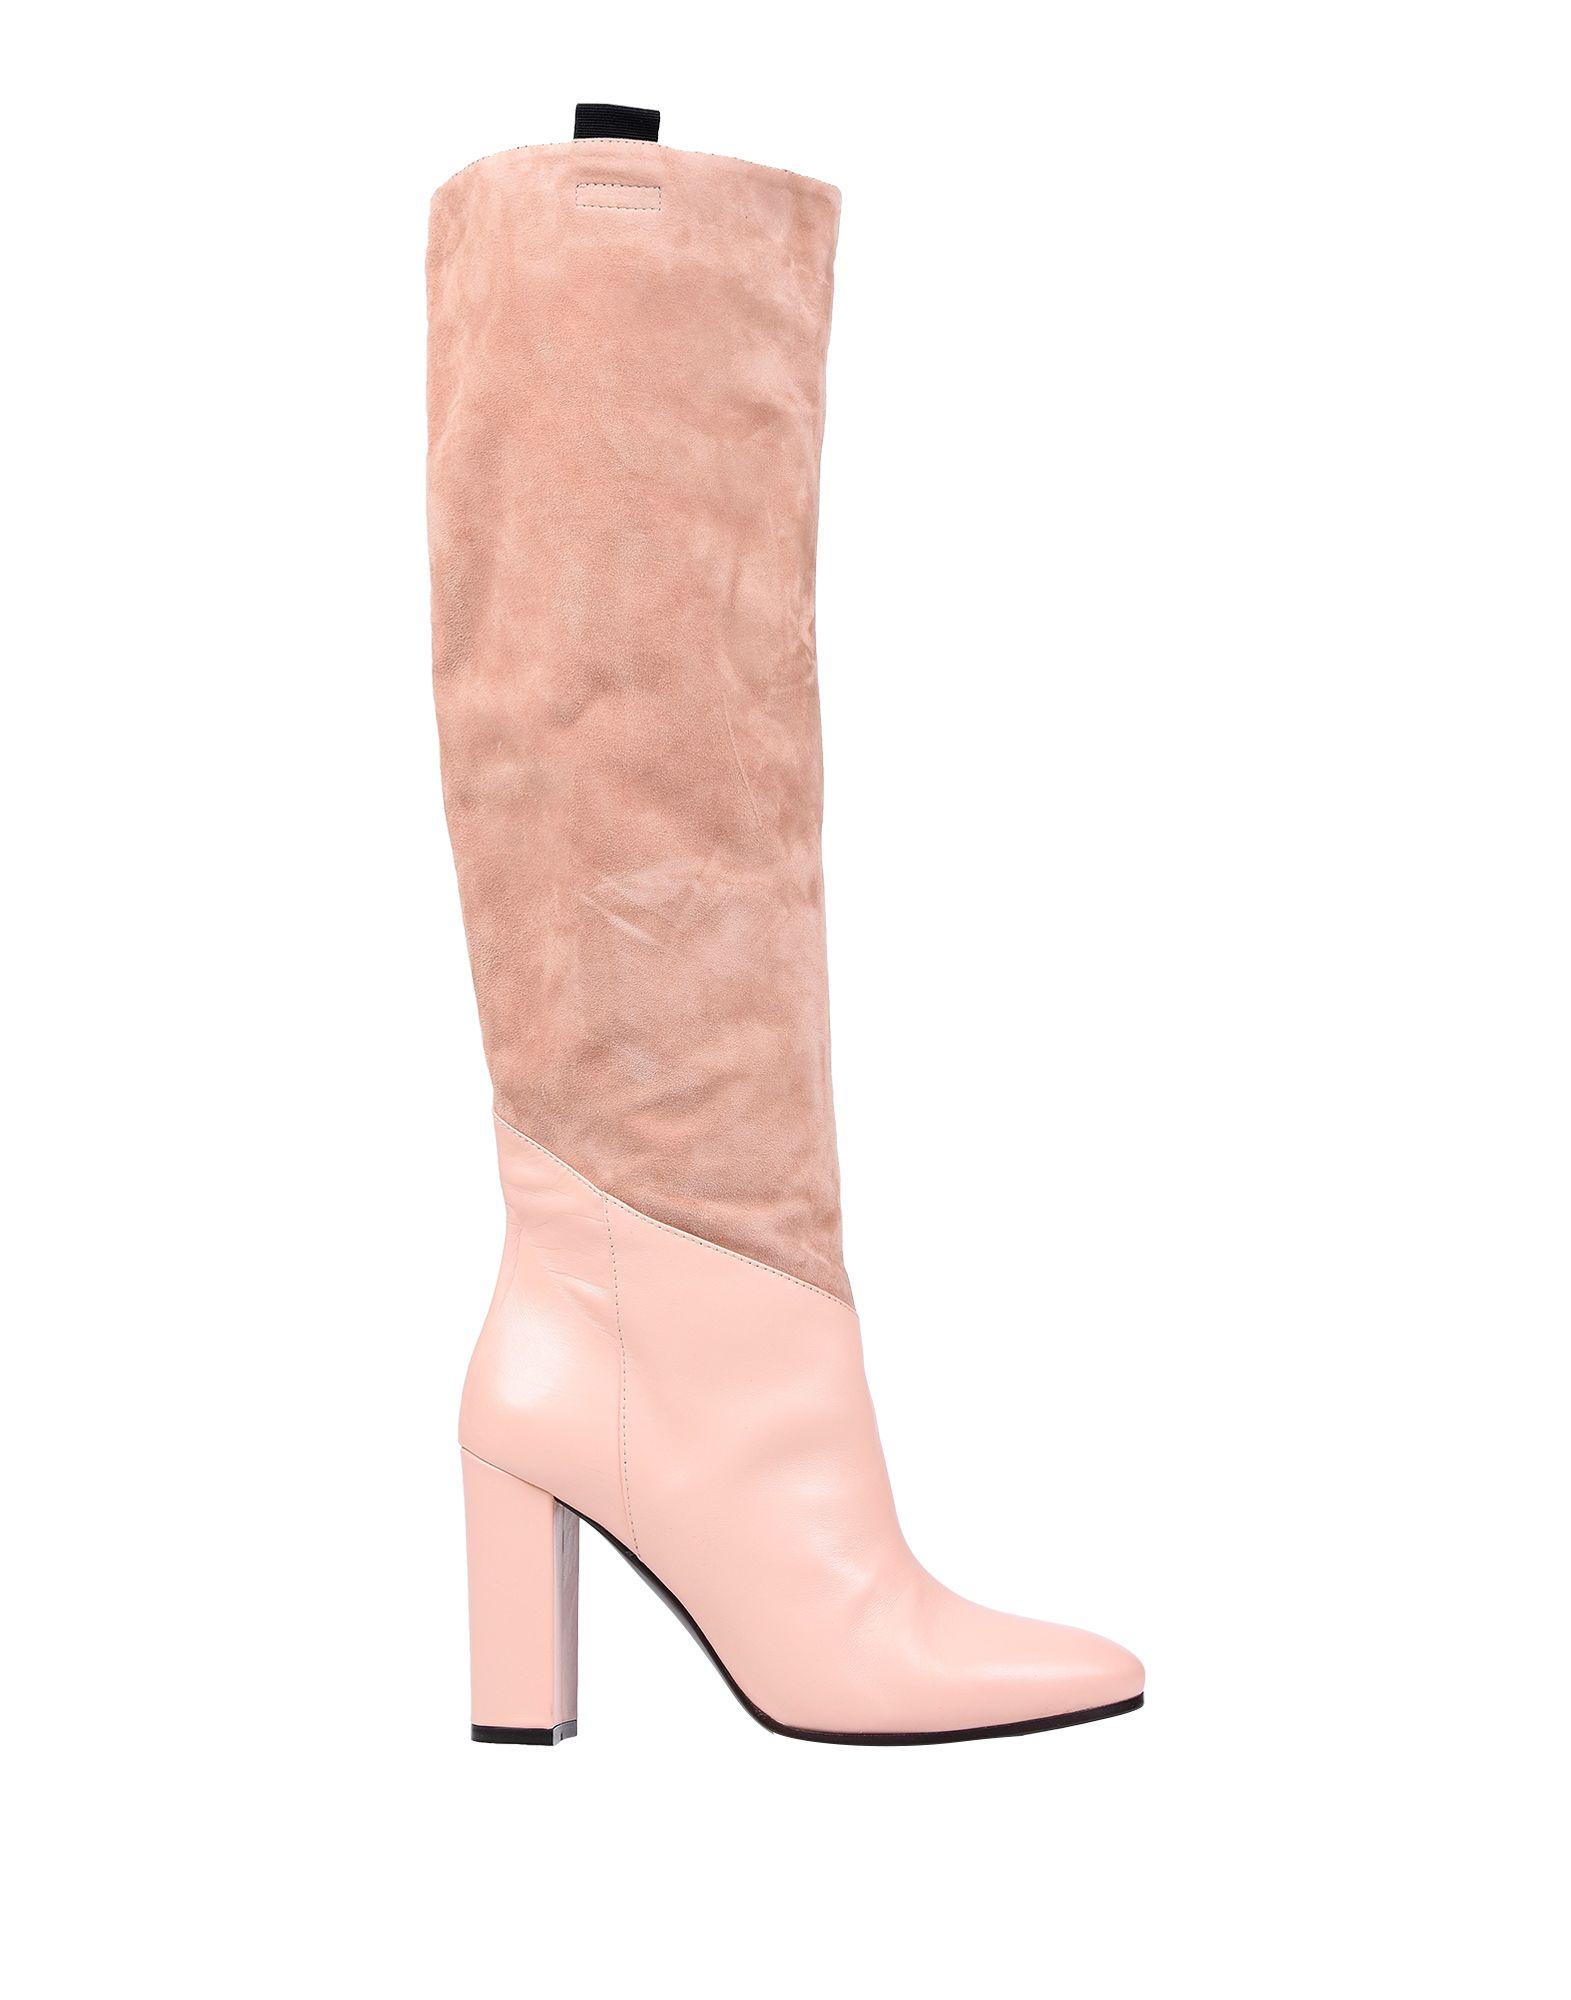 Via Roma 15 Suede Boots in Pale Pink 